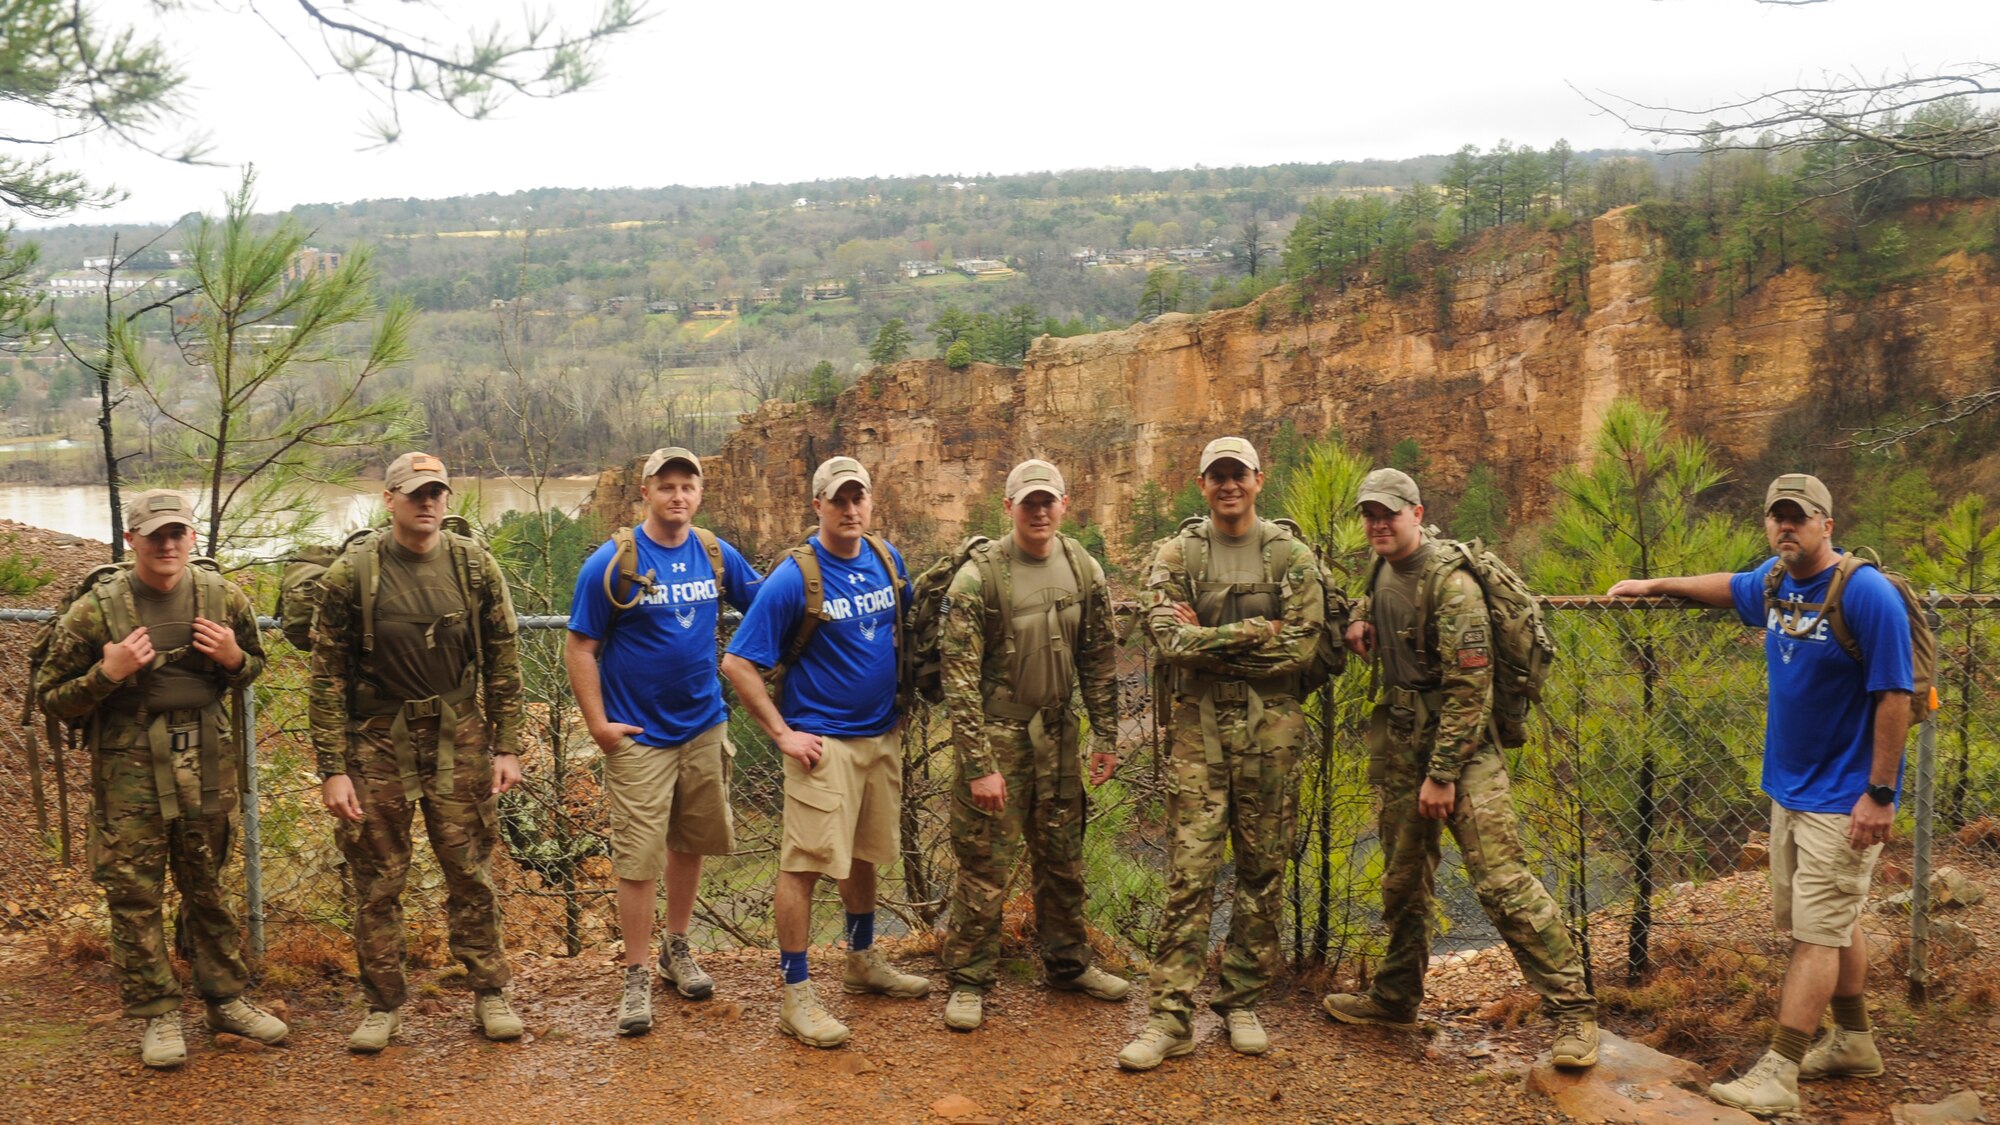 Members of the 19th Logistics Readiness Squadron pose for a photo during an 18-mile ruck march, March 11, 2016 at Burns Park in North Little Rock, Ark. The 19th LRS team was training for the upcoming Bataan Memorial Death March at White Sands Missile Range, N.M., which serves as a reminder to today’s generation of the harsh conditions the World War II veterans were forced to endure during their 60-mile march to a prisoner of war camp in the Philippines. (U.S. Air Force photo/Senior Airman Harry Brexel) 